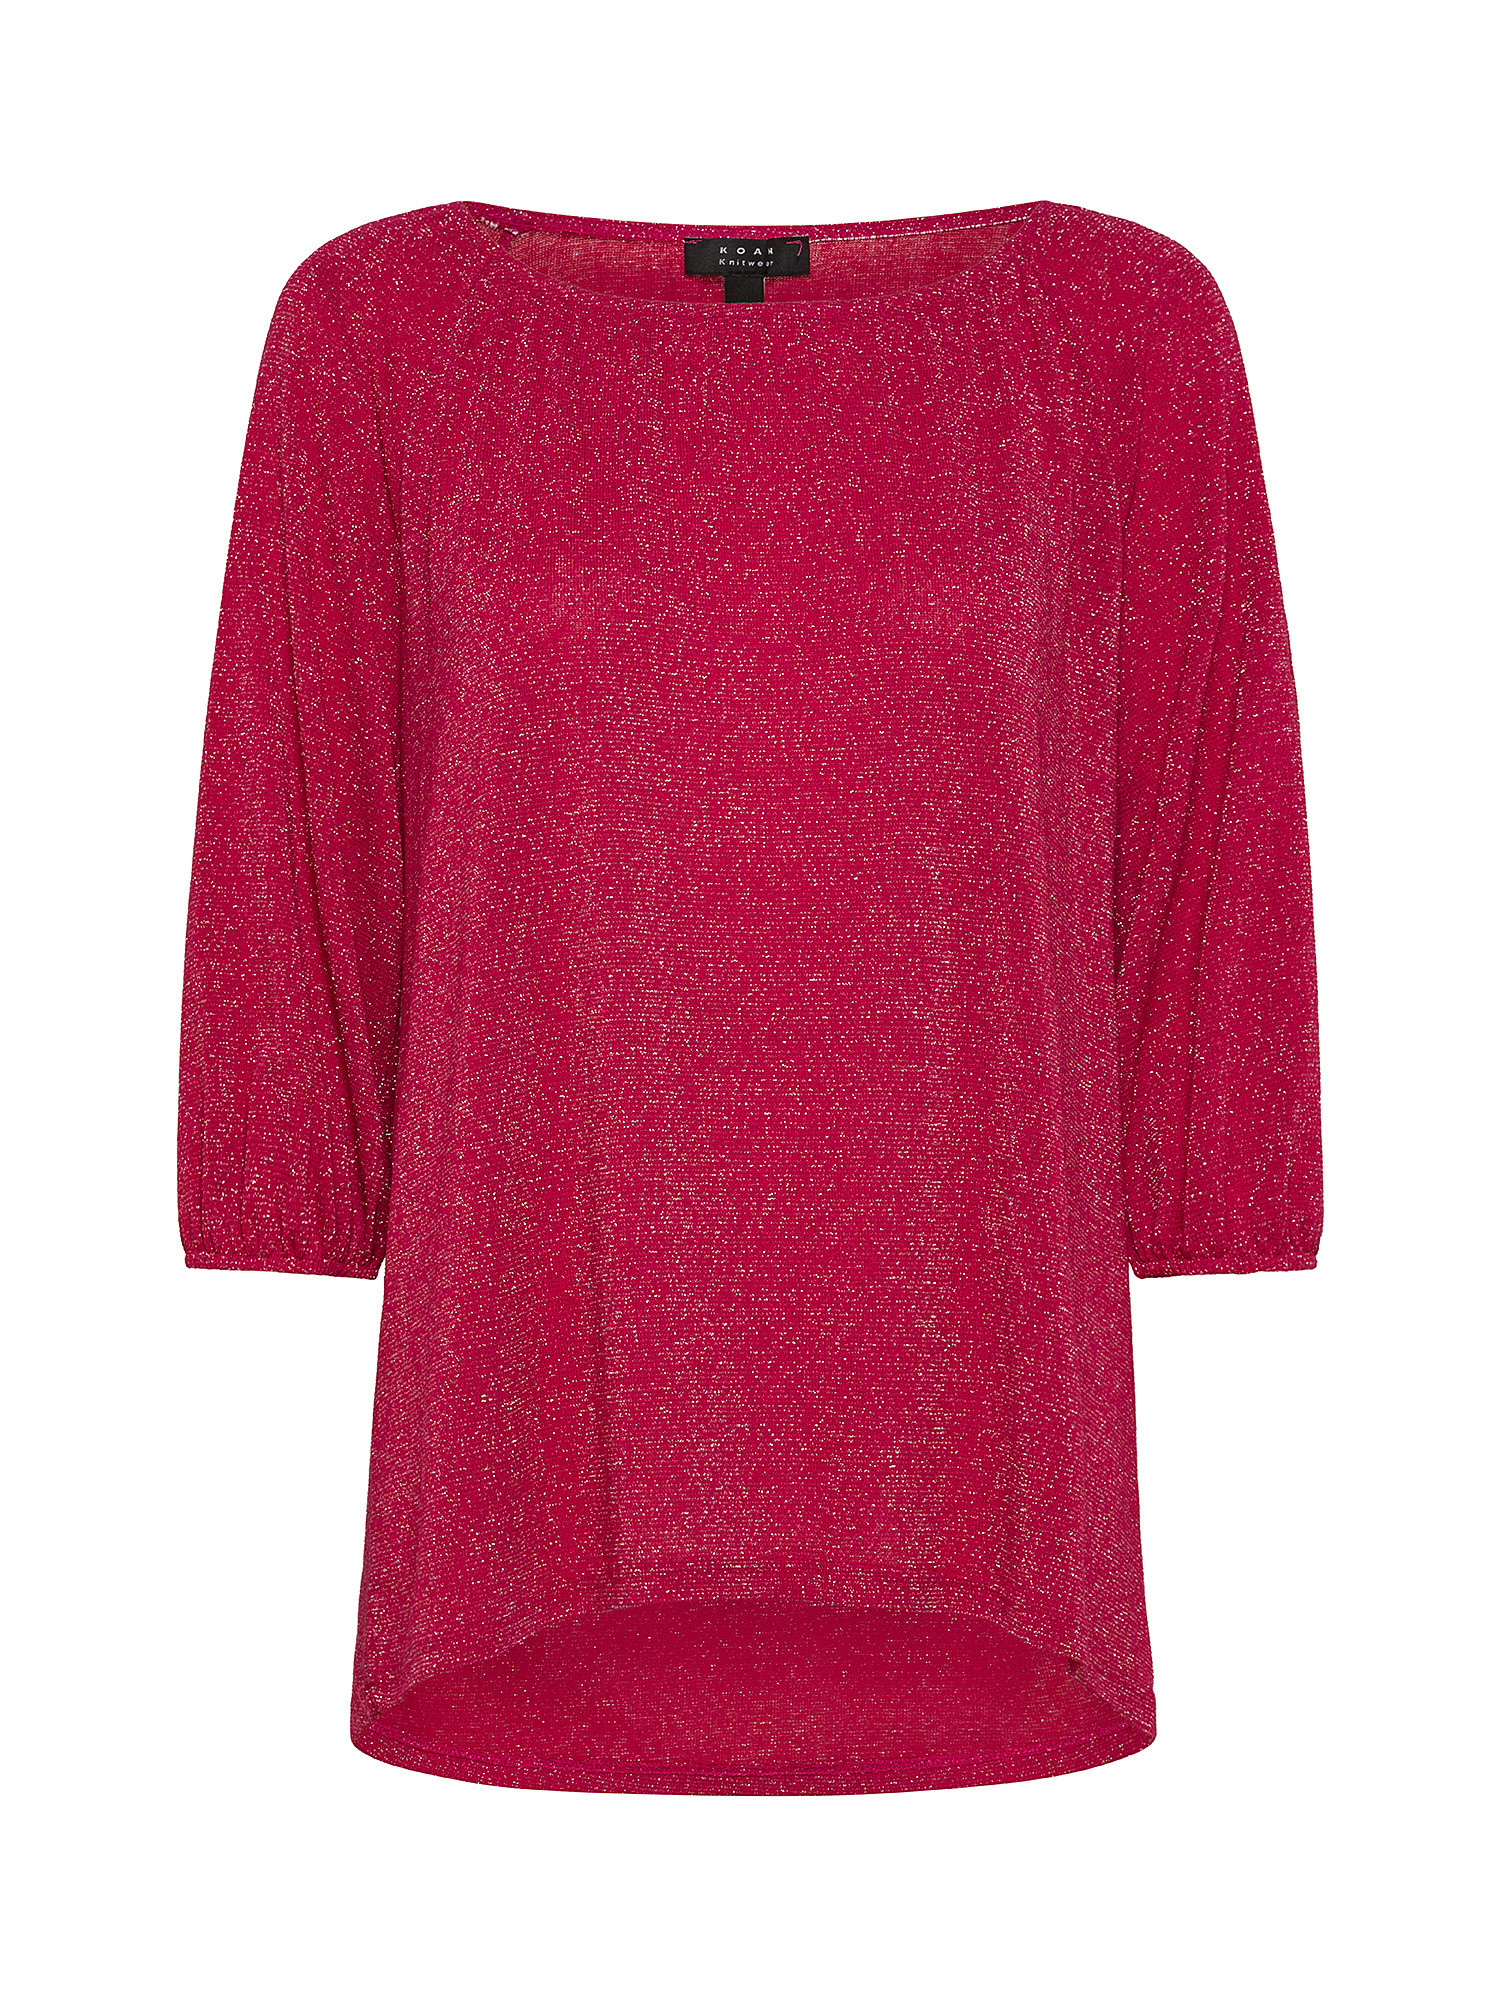 T-shirt con manica raglan, Rosa fuxia, large image number 0